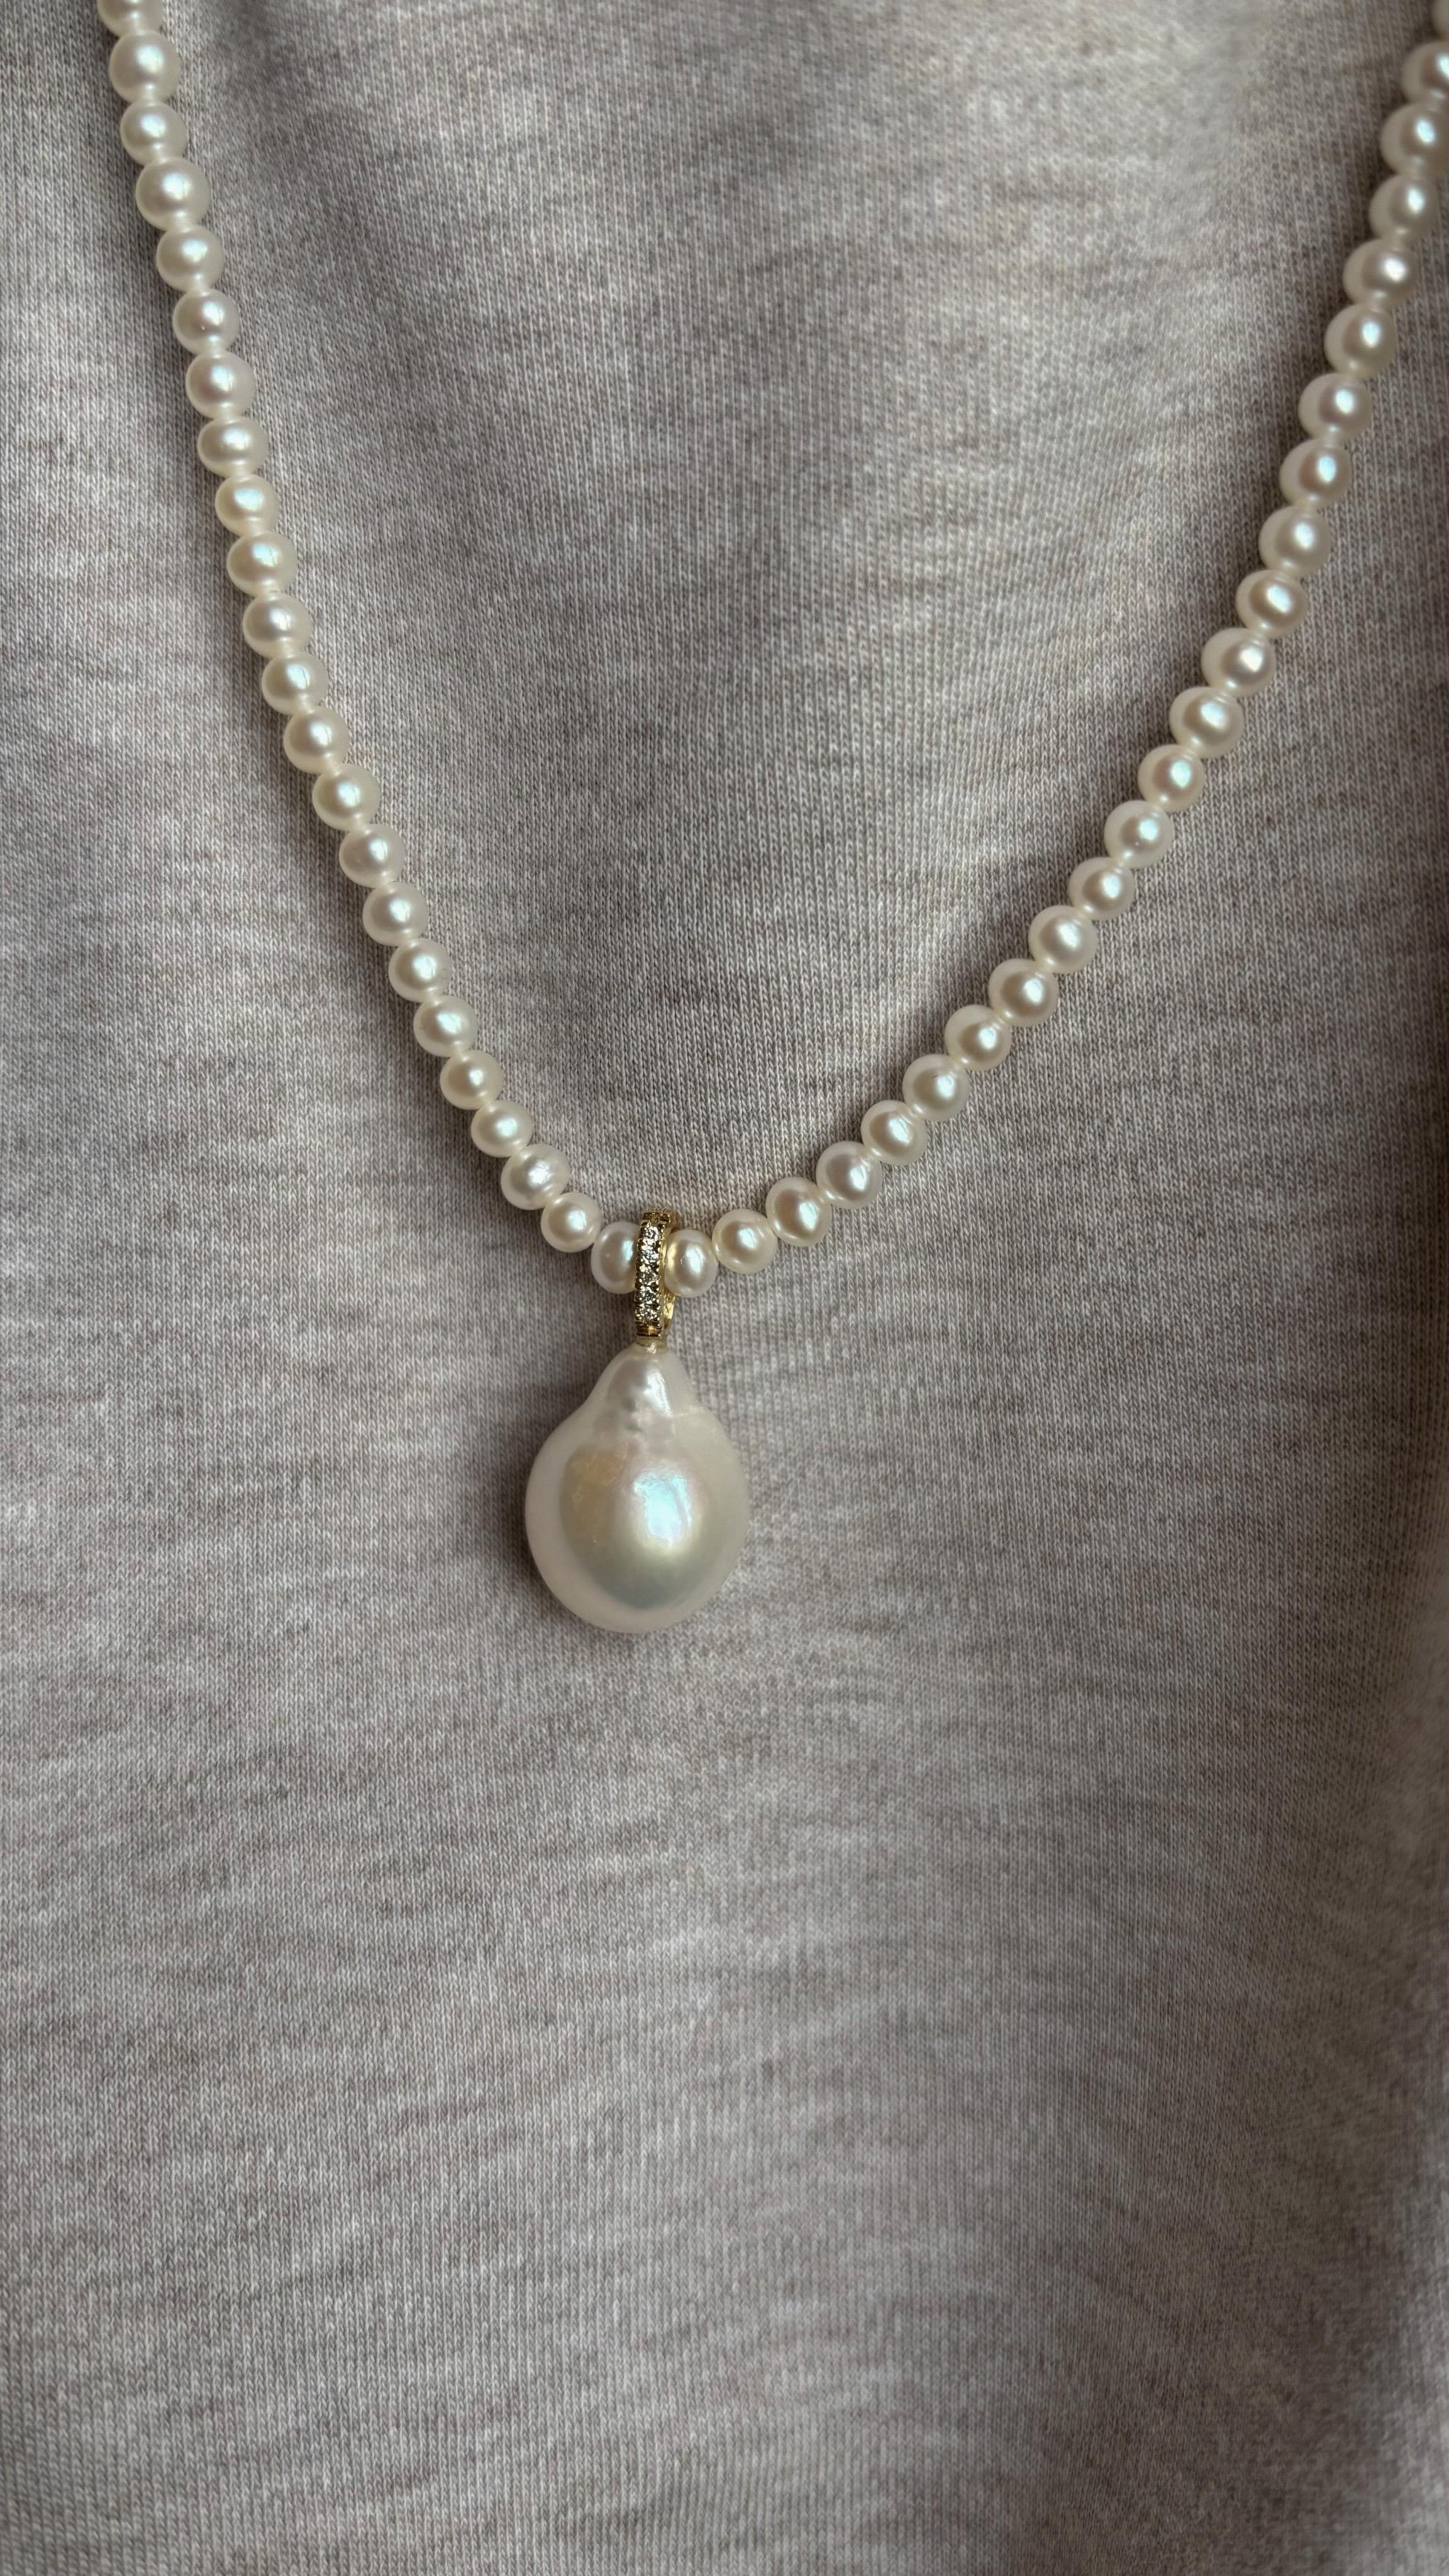 Mini Pearl Necklace with Baroque Charm and Diamonds, in 18K Gold